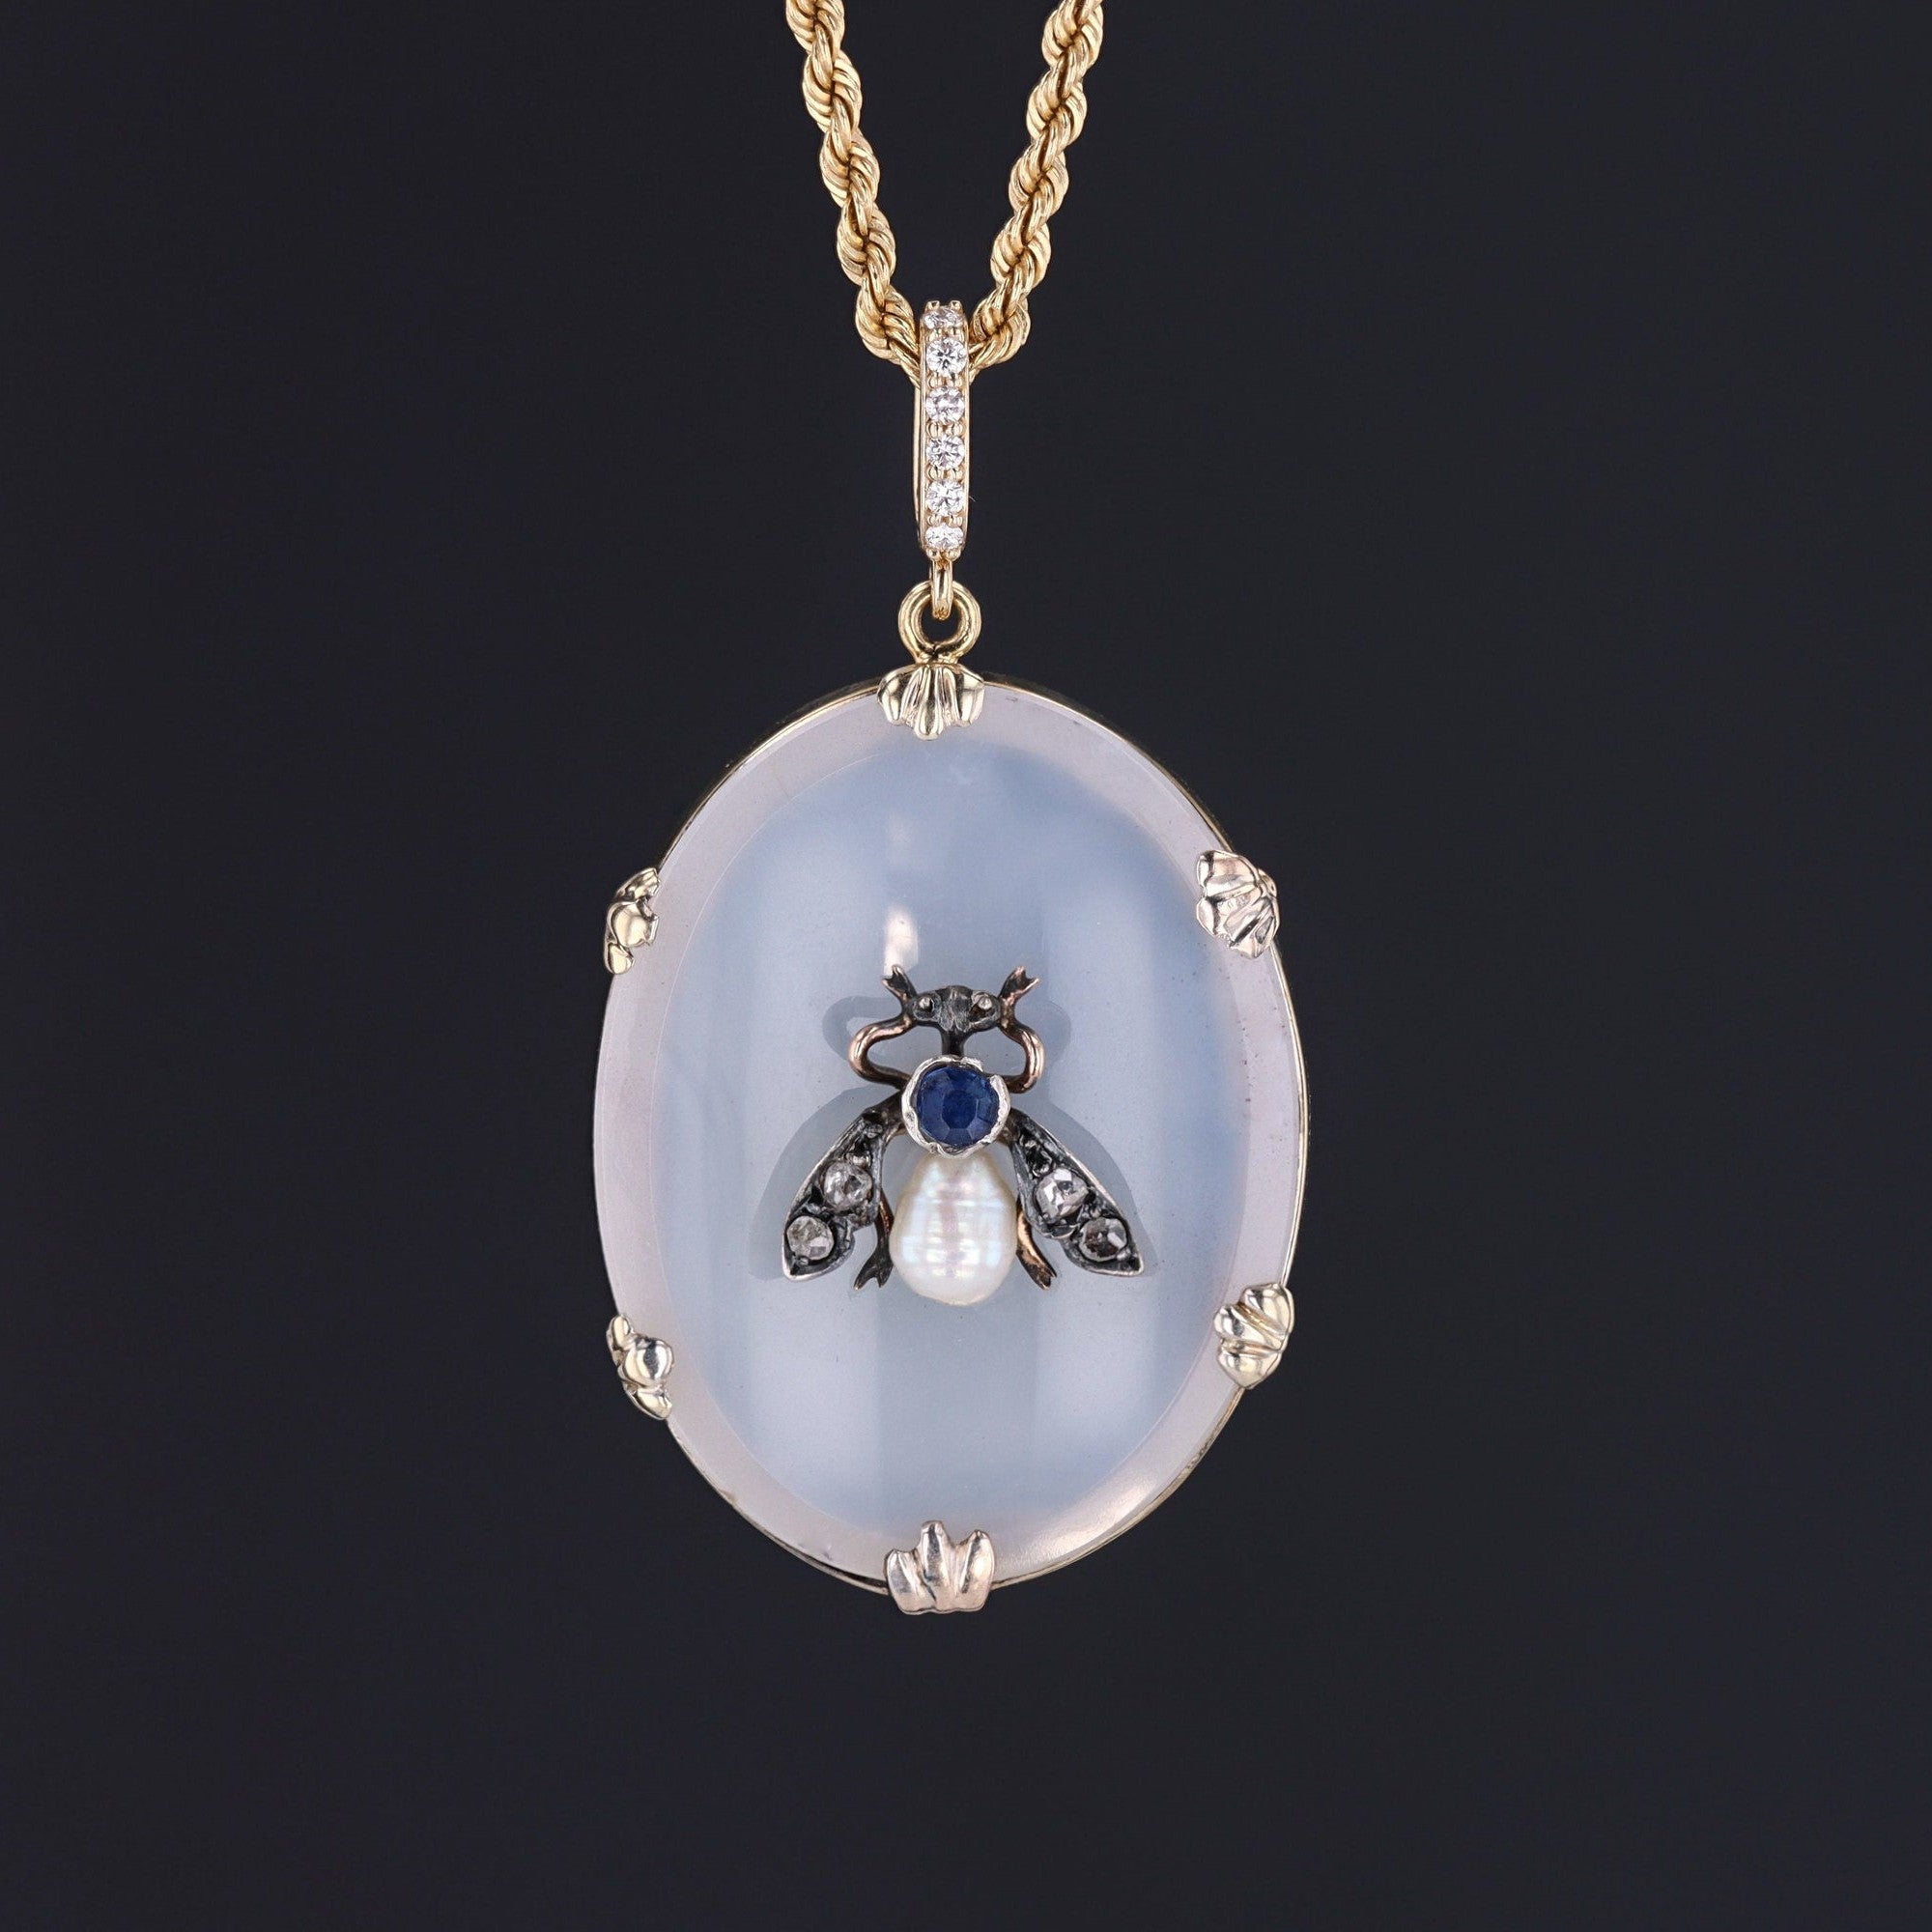 Antique Chalcedony and Gemstone Bug Pendant on 14k Gold